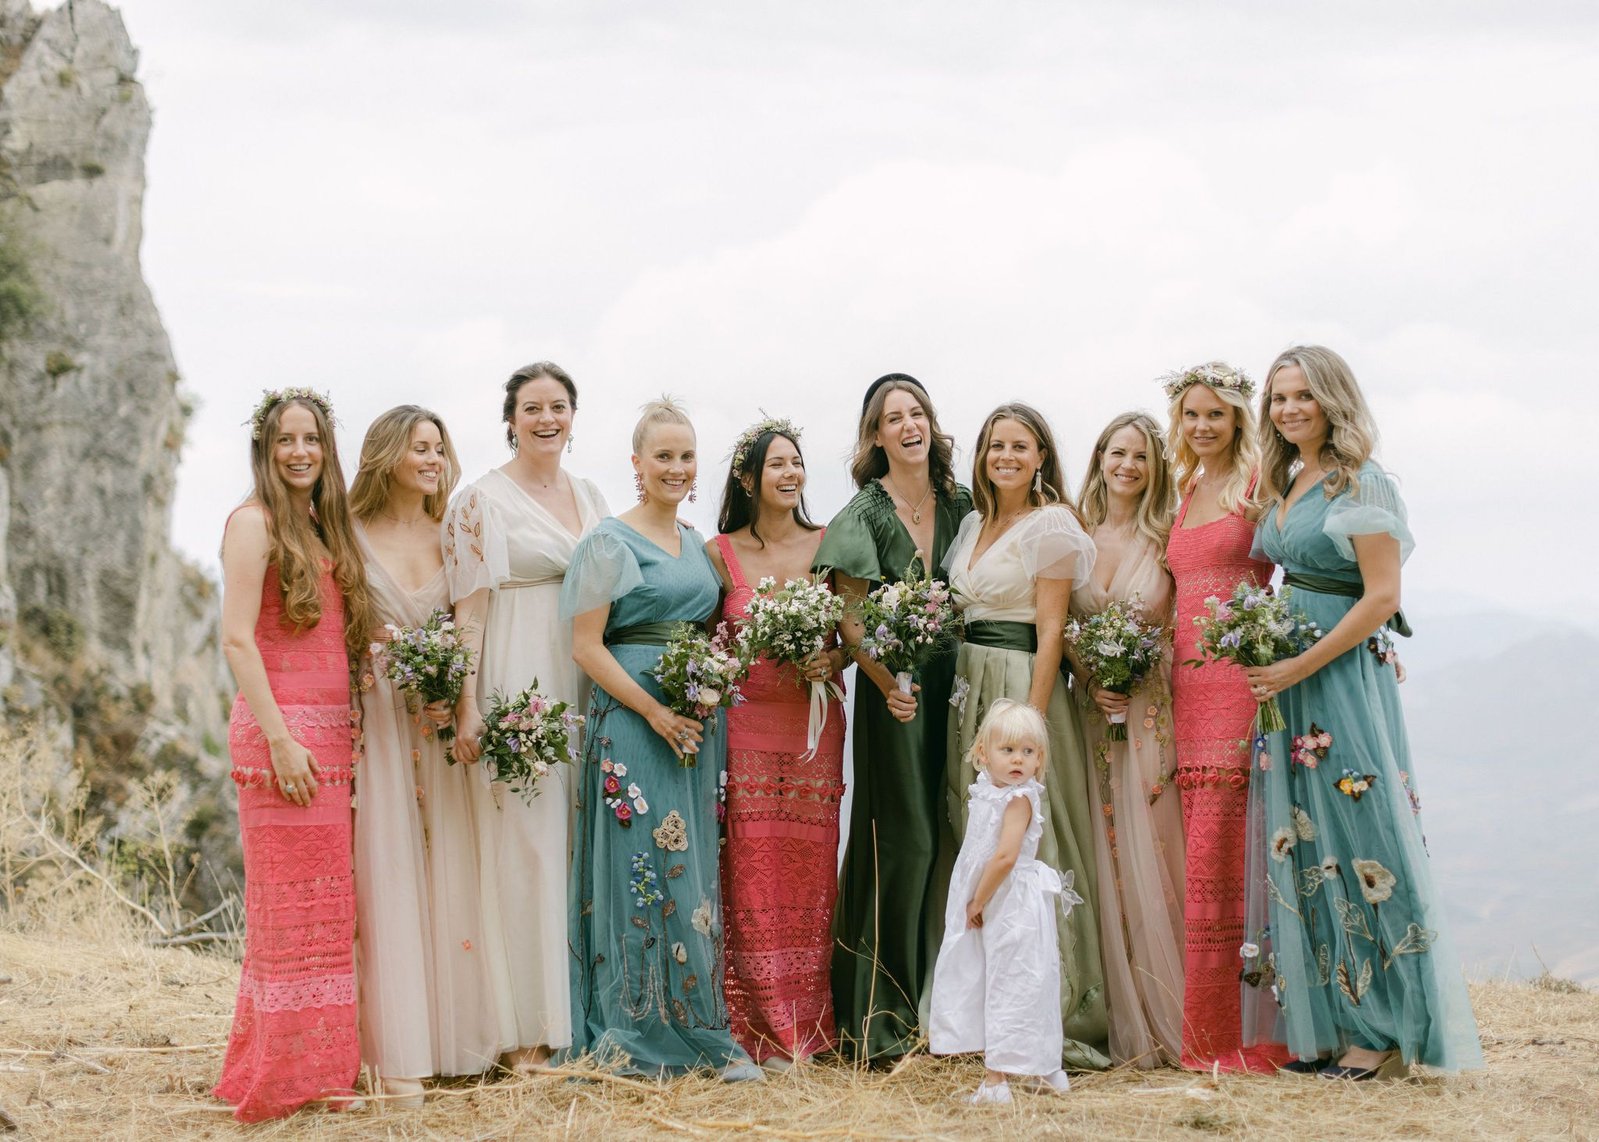 Ten bridesmaids stand together with a blonde haired flower girl on a hilltop in Sicily. They are all holding a bouquet of flowers each smiling into the camera.